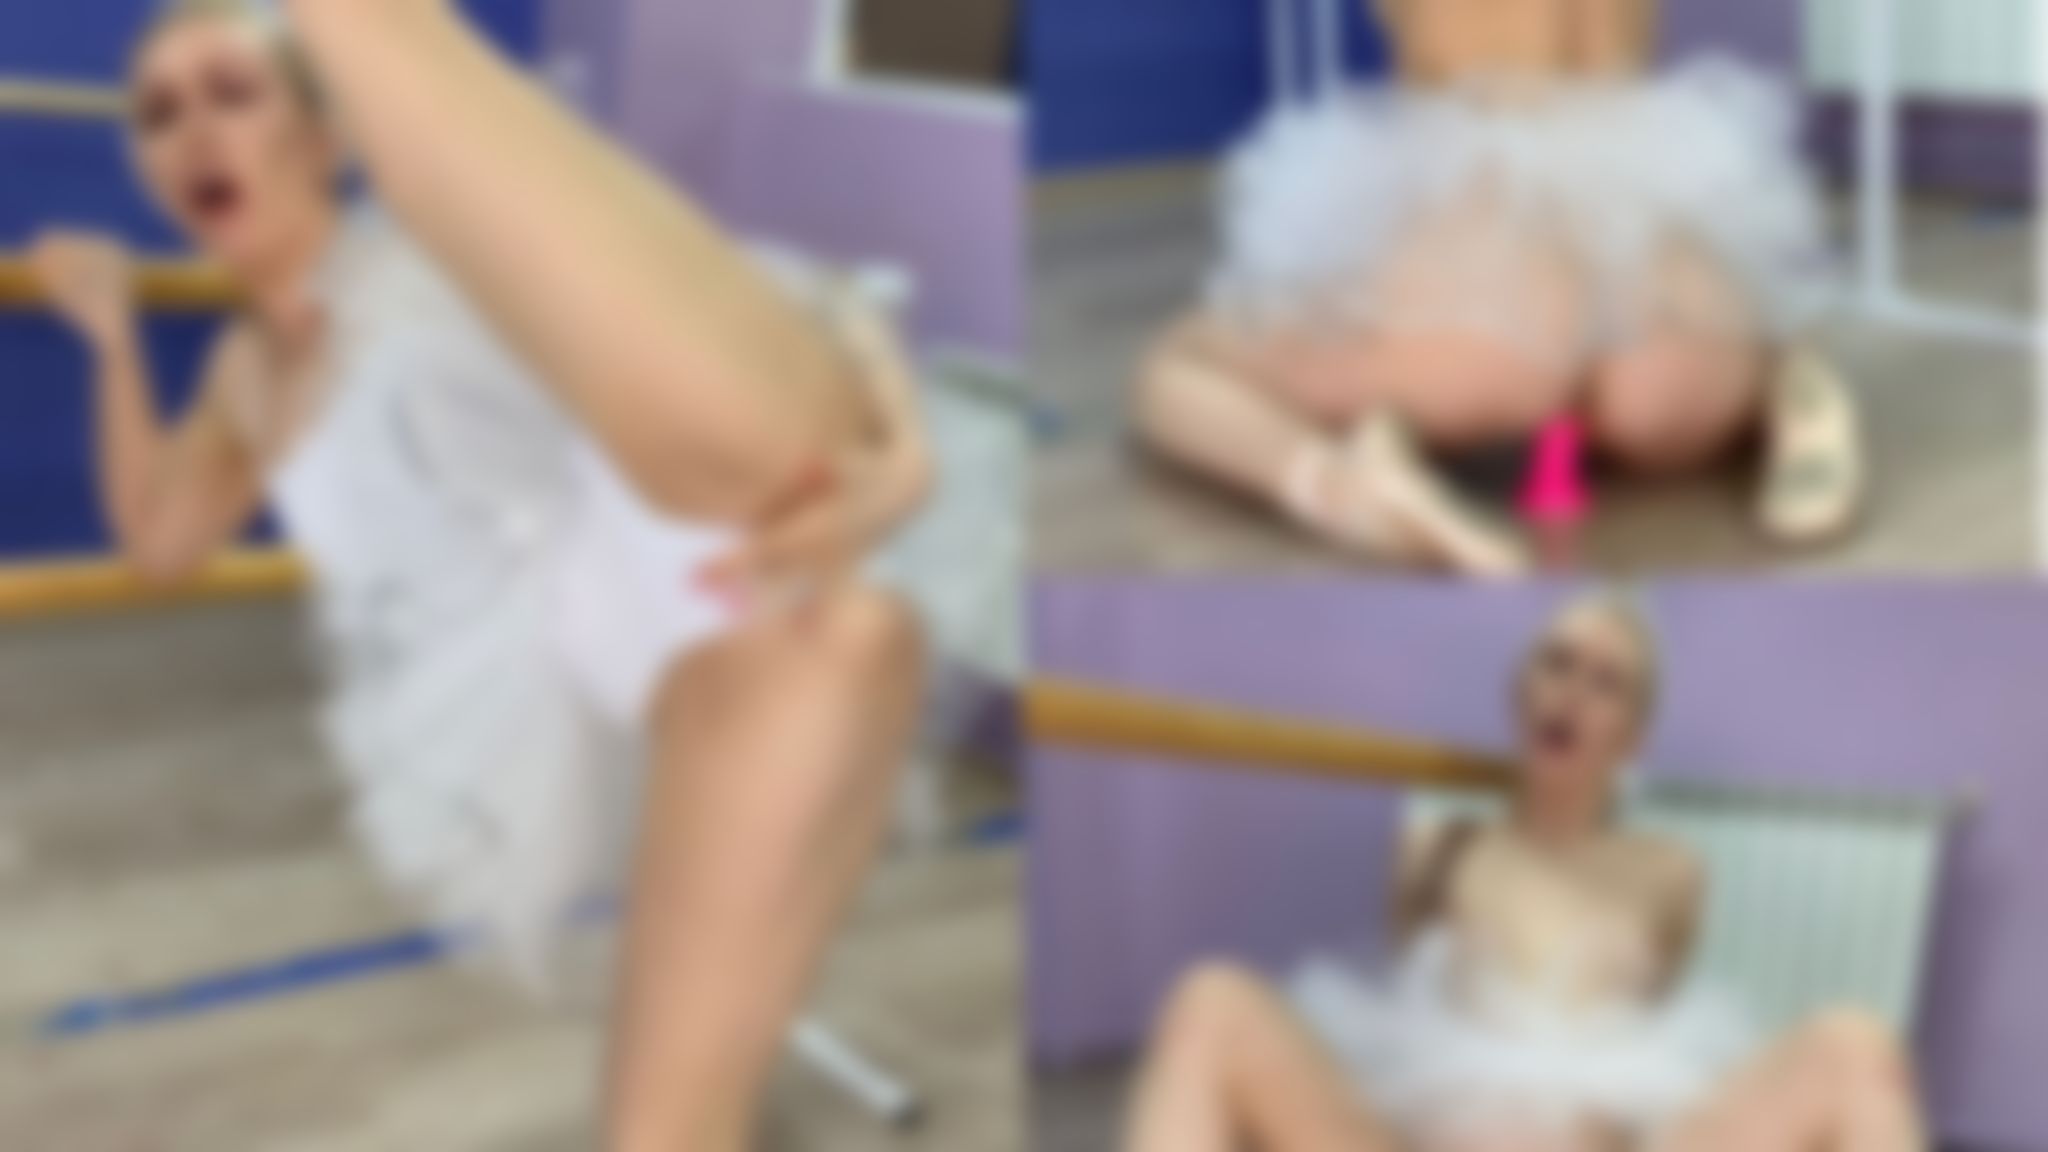 annadels : I like to try on different looks and masturbate .. this time i was a ballerina. Have you seen a masturbating ballerina  before? video due 17 minutes